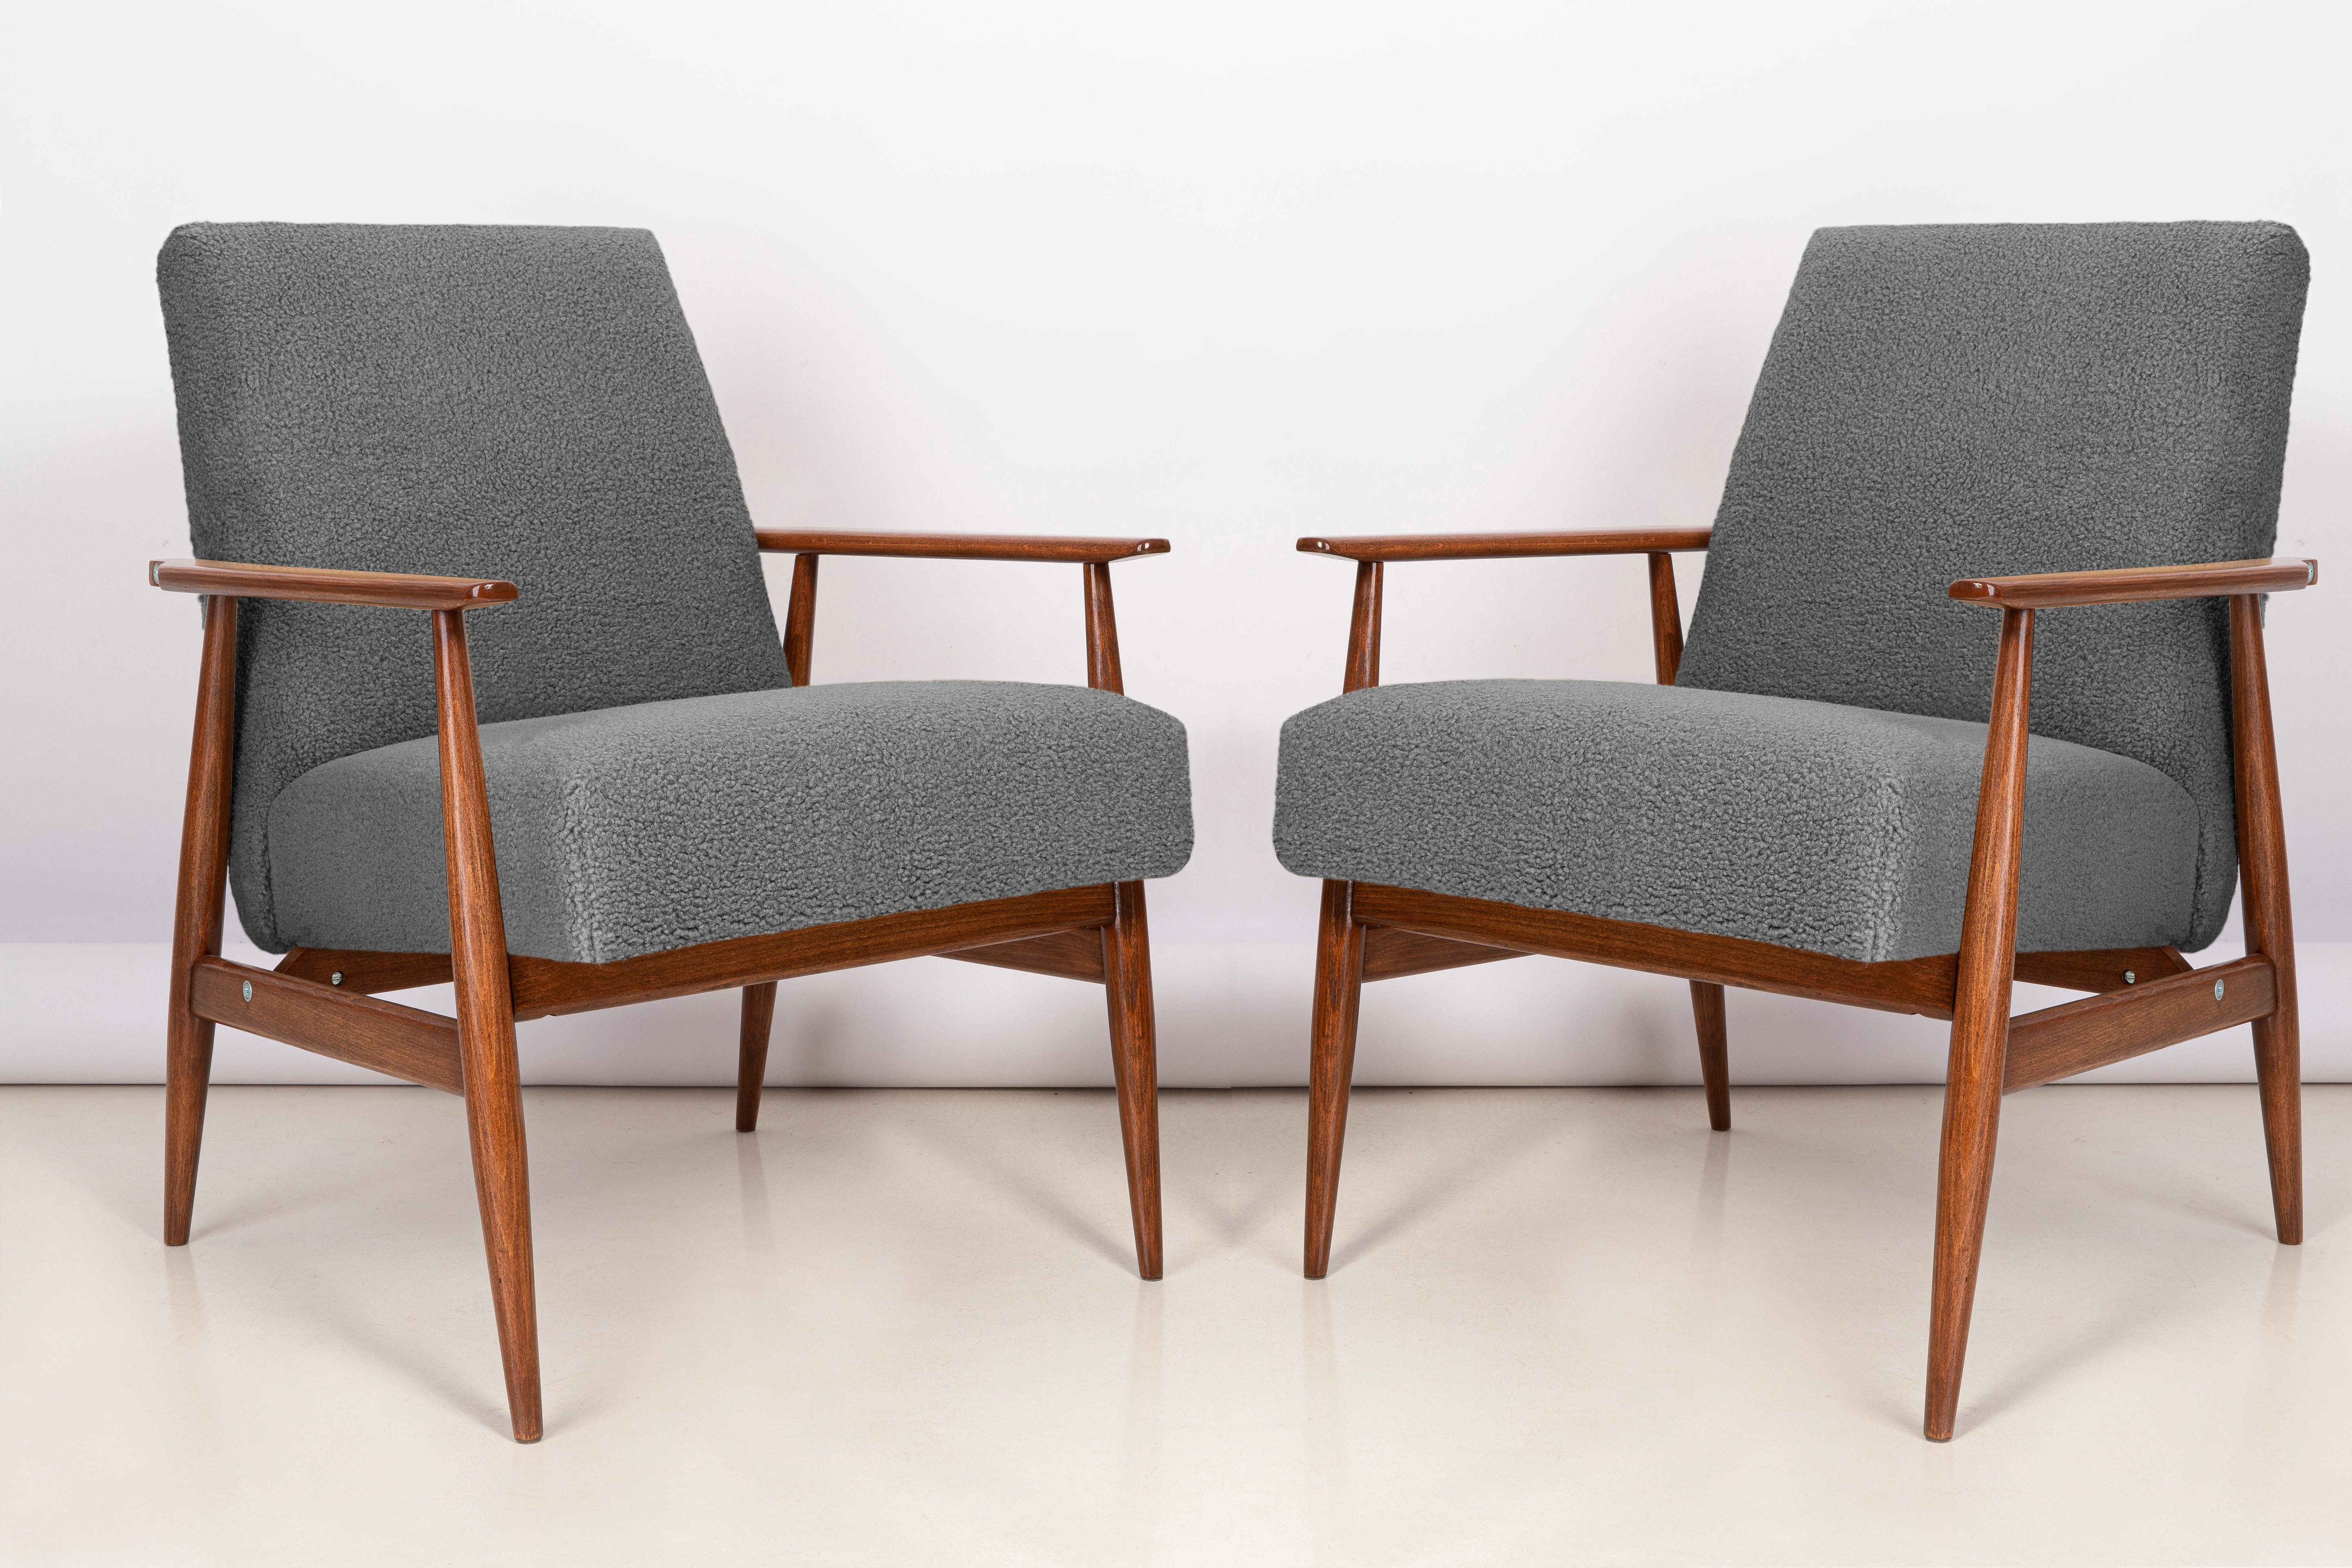 A pair of grey bouclé armchairs, designed by Henryk Lis in 1960s. Furniture after full professional carpentry and upholstery renovation. The armchairs will be perfect in Minimalist spaces, both private and public. 

Upholstery - faux fur has a